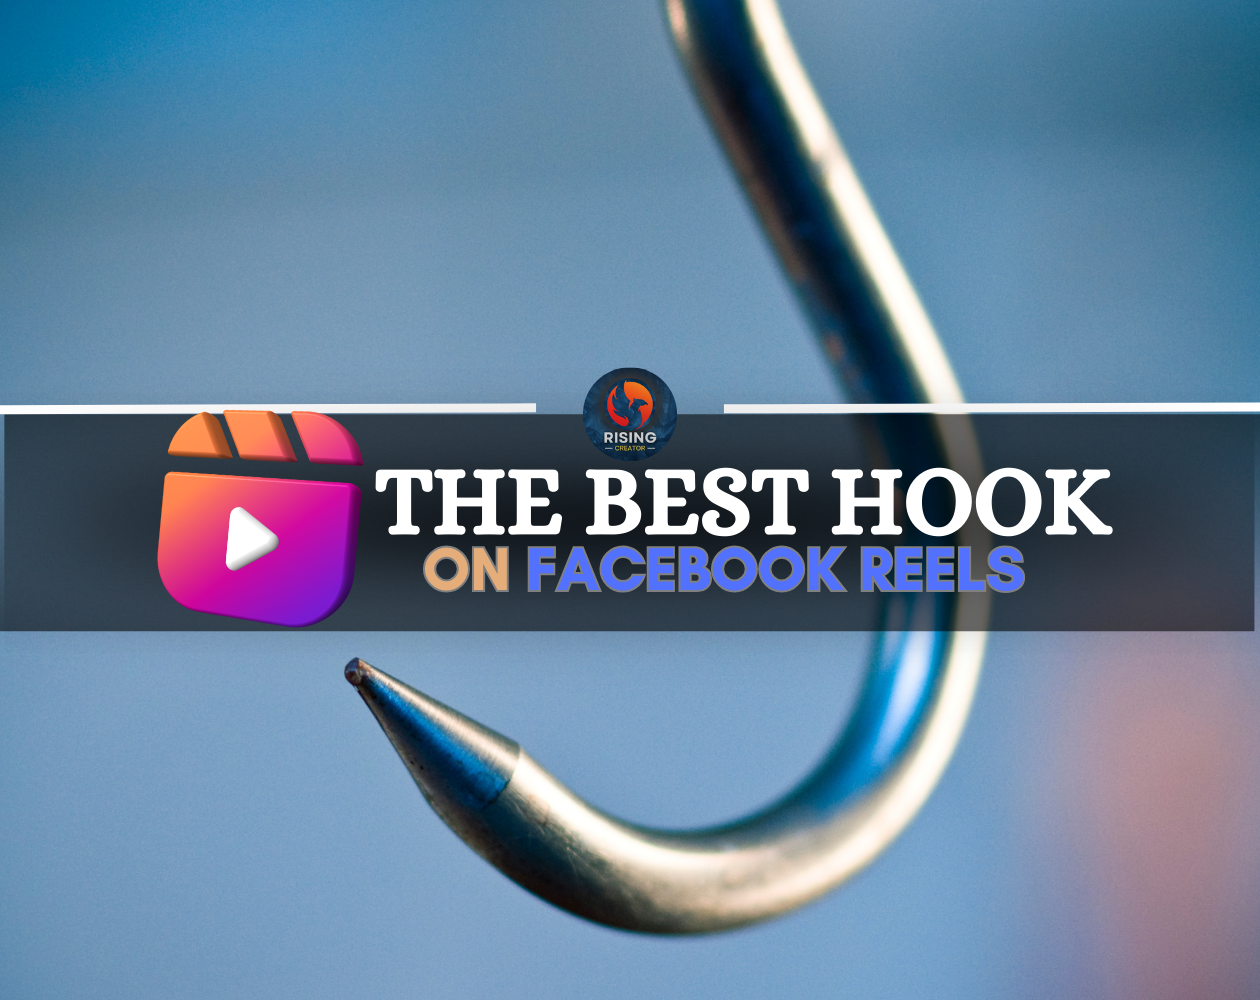 How to Create the Best Hook on Facebook Reels   Learn how to create the best hook on Facebook Reels in the crucial first 3-8 seconds using video transitions, bold visuals, questions, music, text, and more.